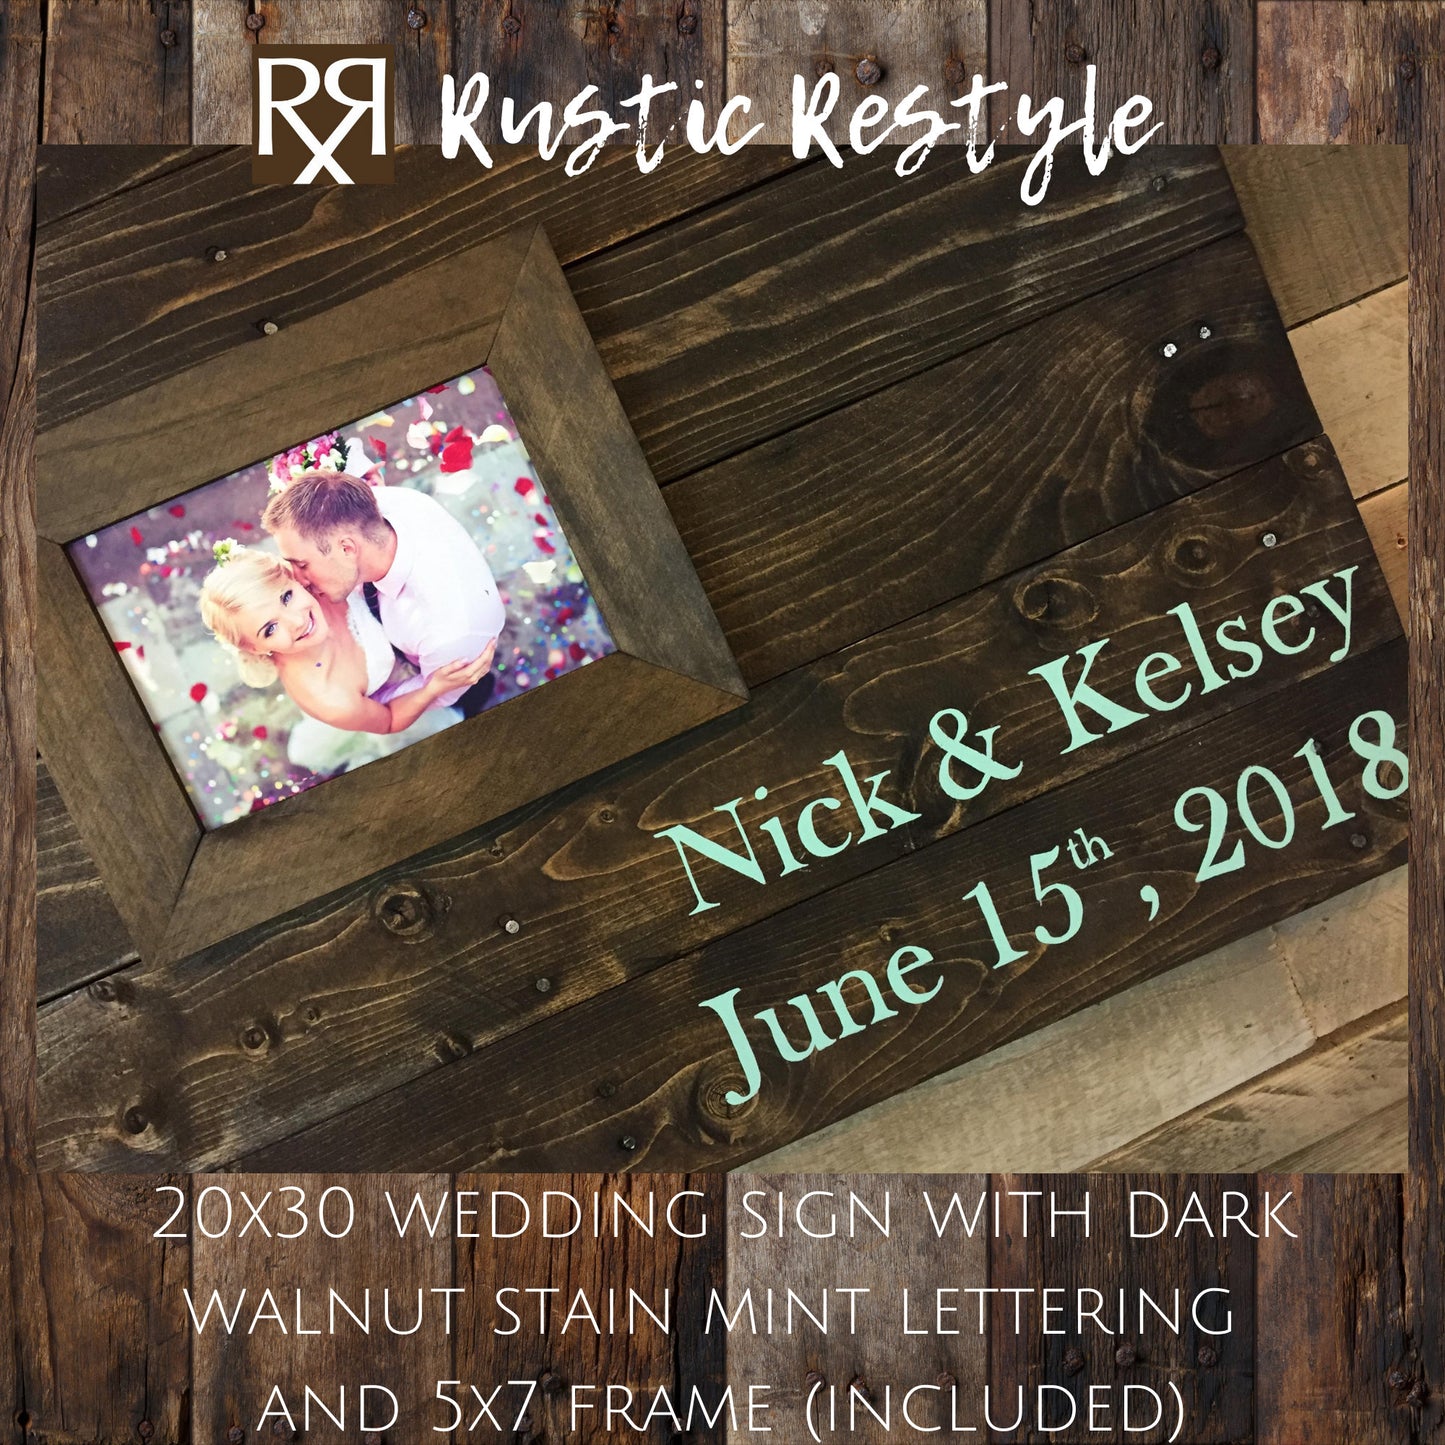 Guest book frame, Photo Guestbook sign, Wedding initials sign, rustic wedding decor, Custom wedding gift, wood sign wedding, pallet wall art - Rustic Restyle